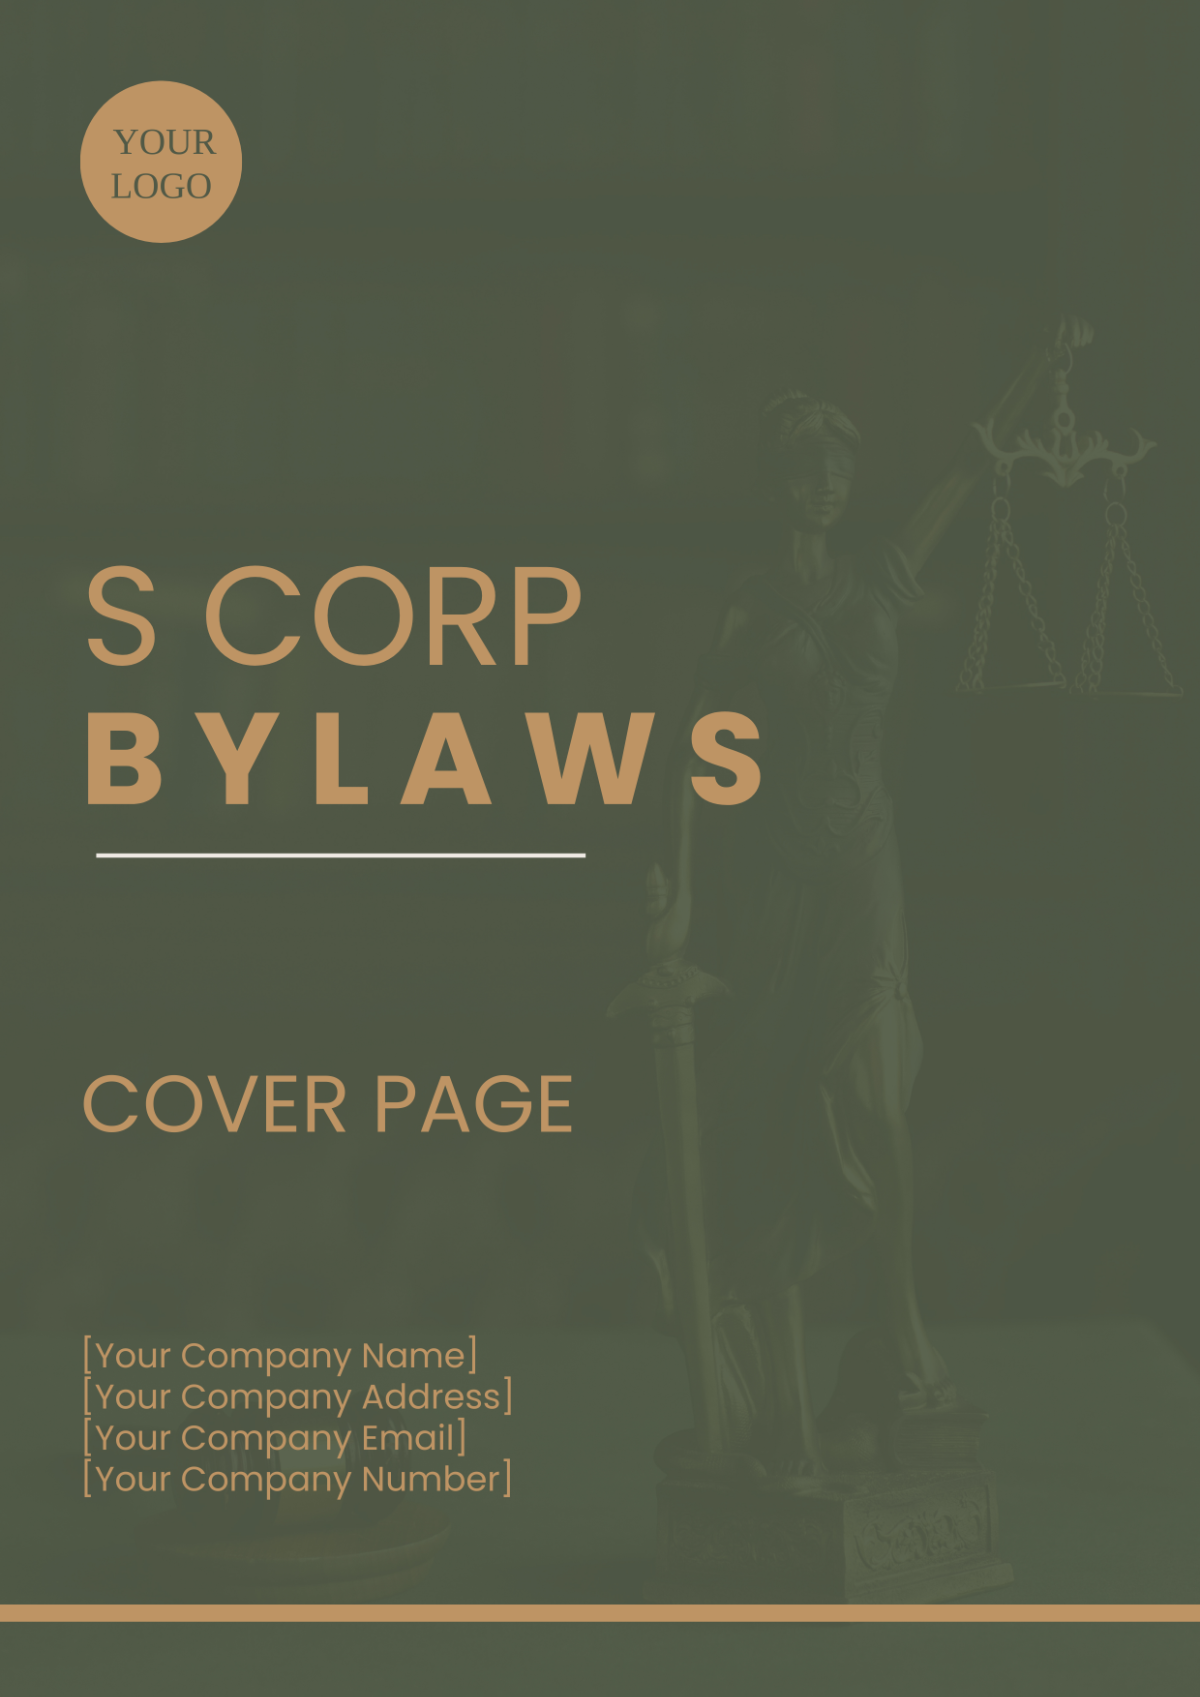 S Corp Bylaws Cover Page